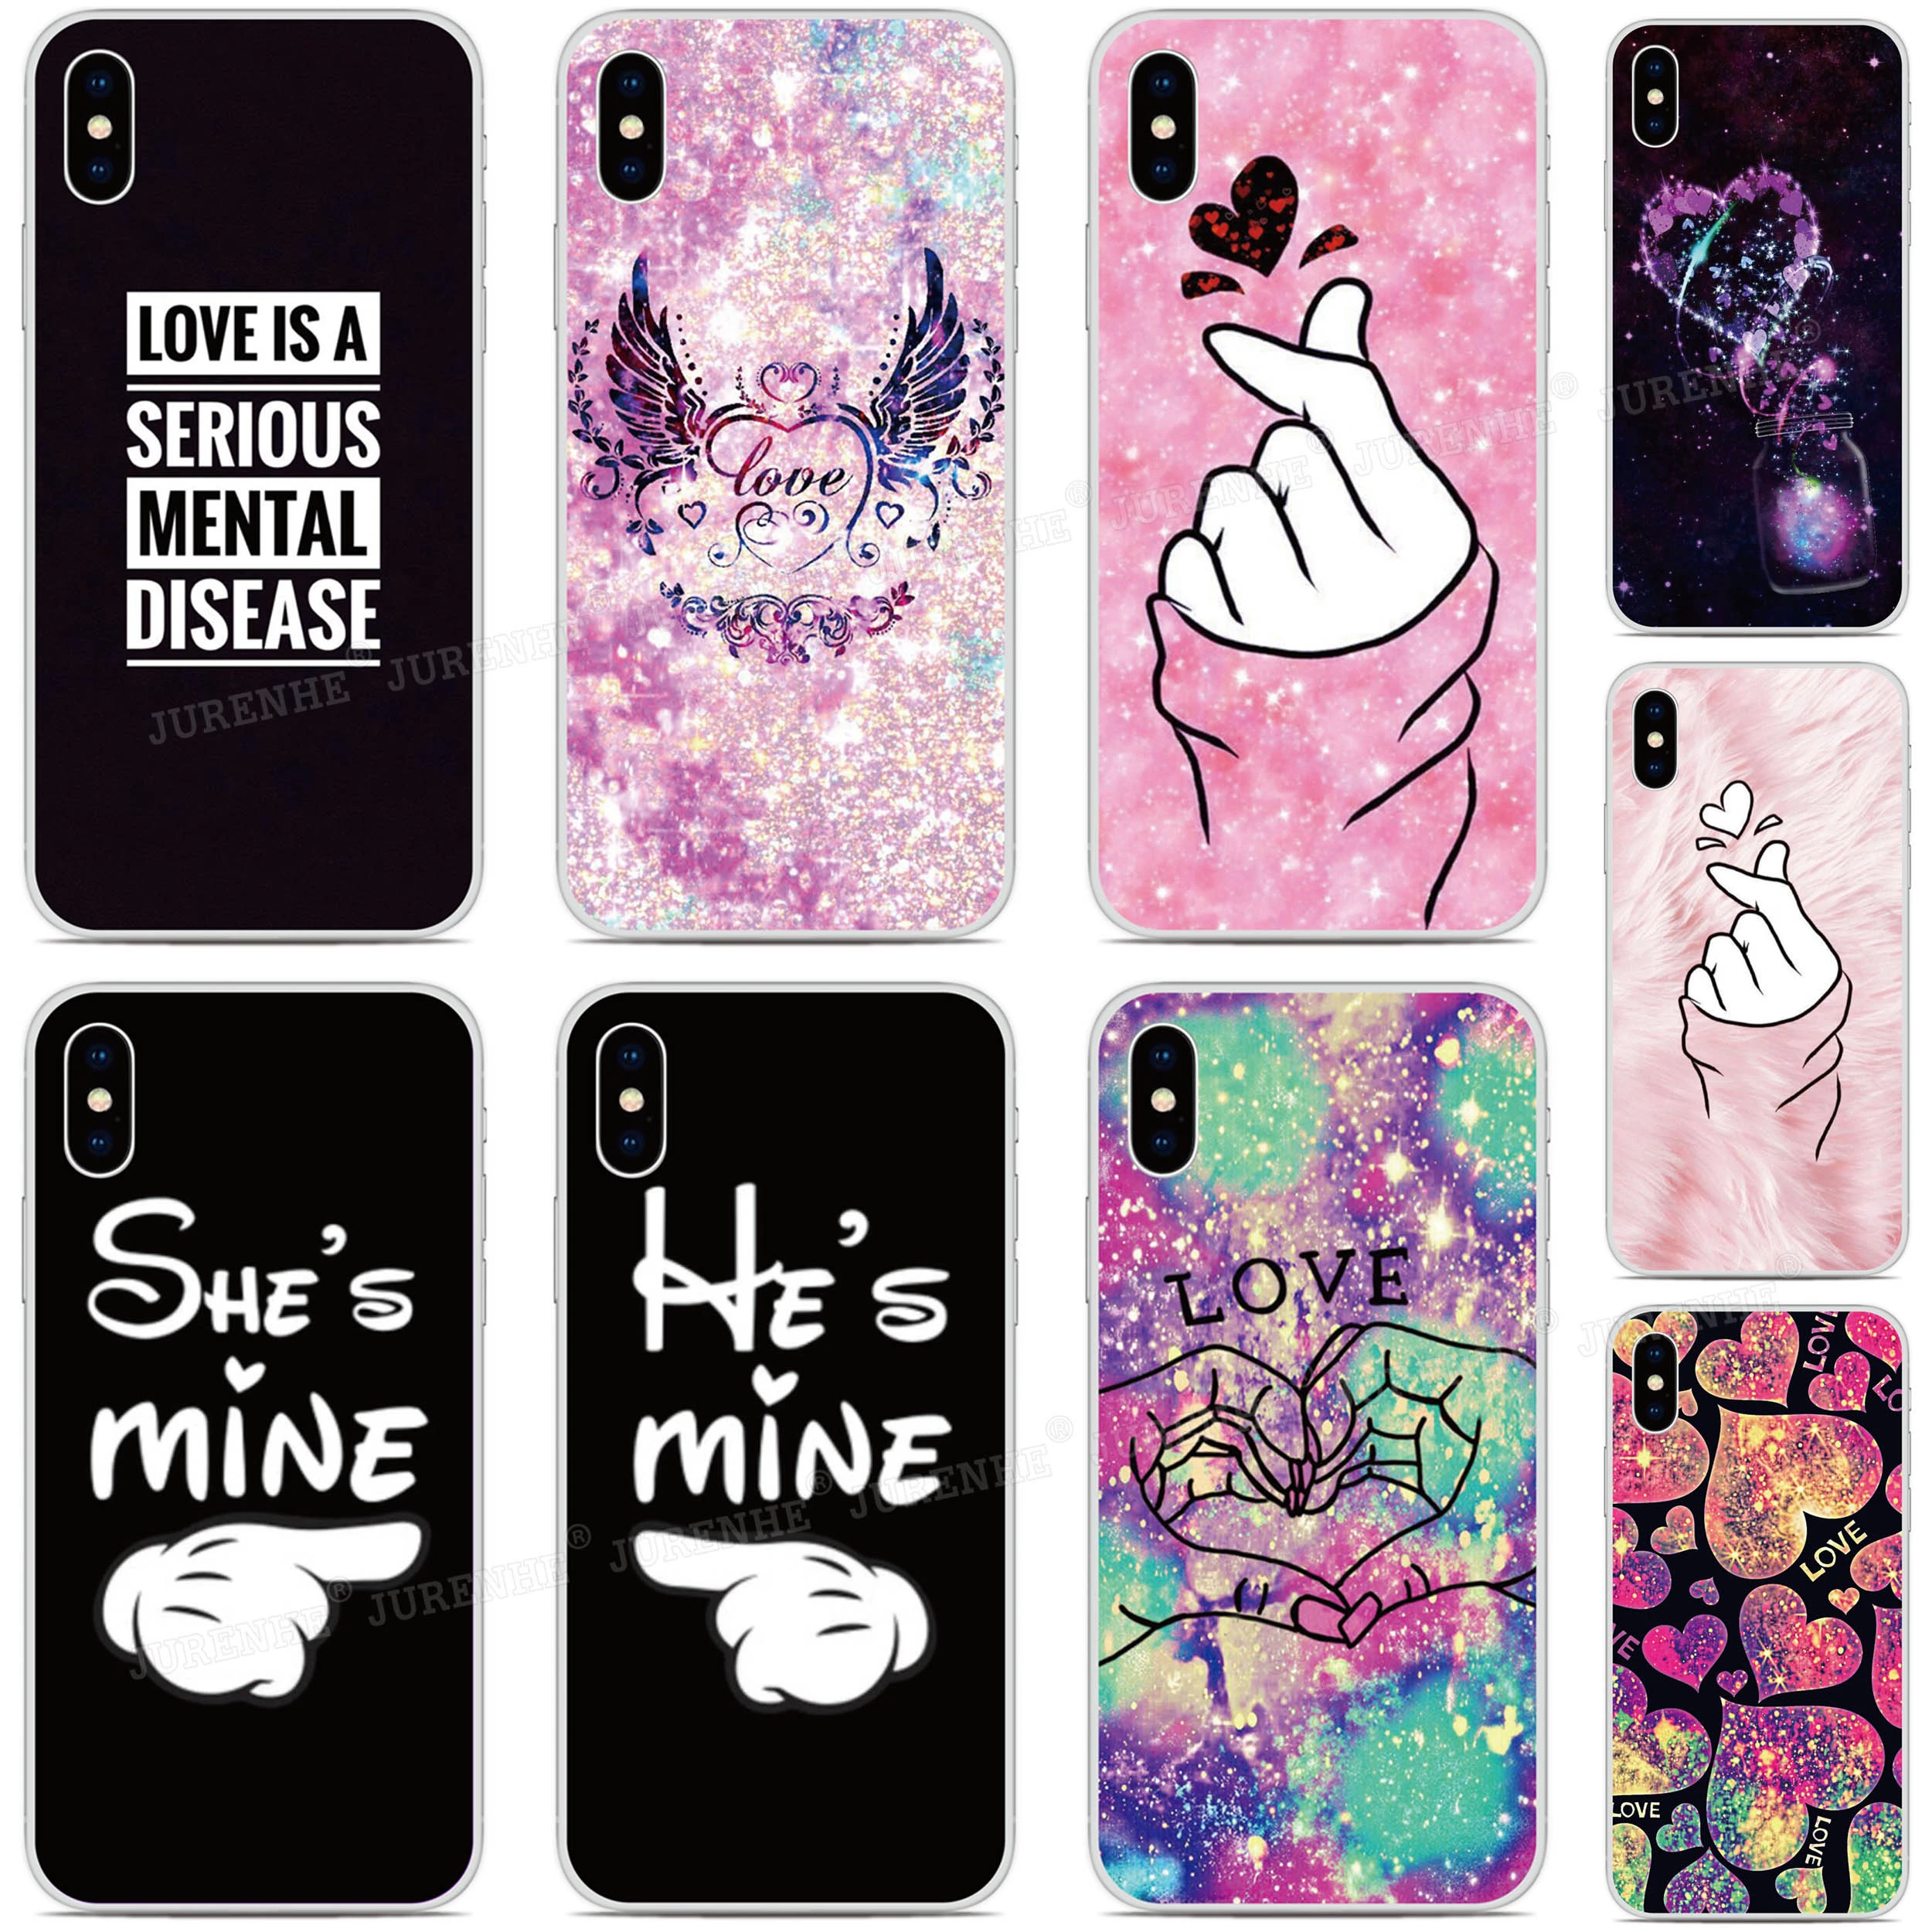 Print Love Heart Soft TPU Case For Wiko Y81 Y61 Y80 Y70 Y60 Y50 Sunny 5 View 5 Plus 4 3 Pro Wim Lite U Feel Prime Cover|Phone Case & Covers| - AliExpress